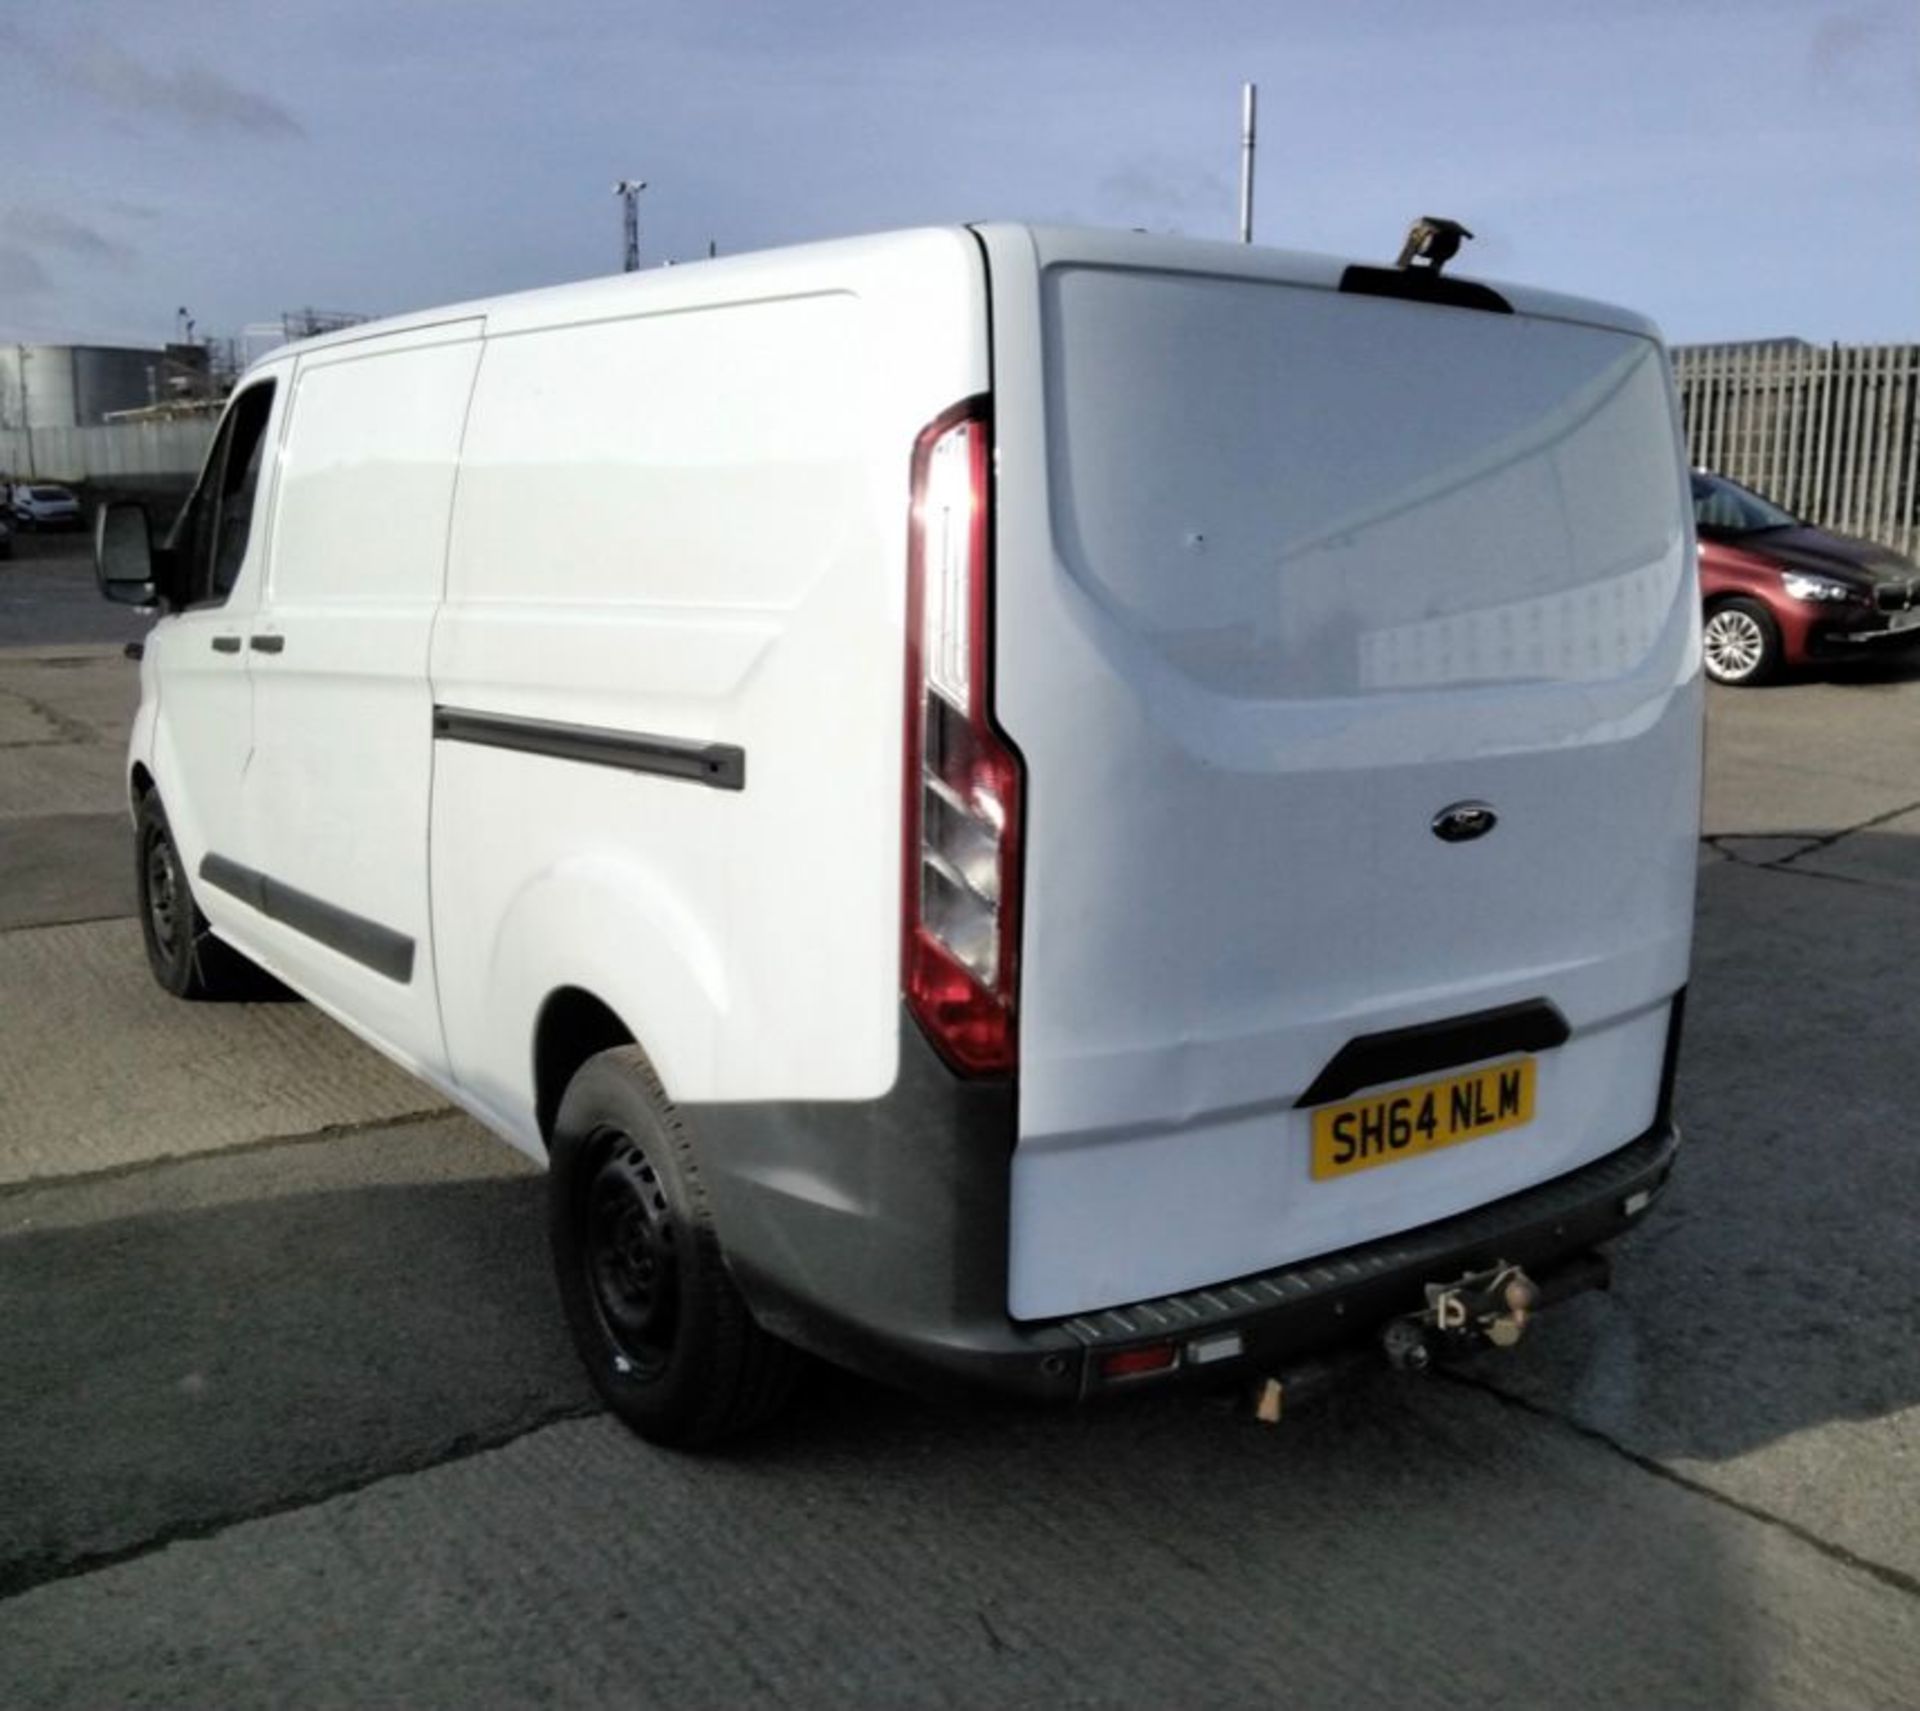 FORD TRANSIT CUSTOM LIMITED 2014 LOCATION NORTH YORKSHIRE. - Image 2 of 5